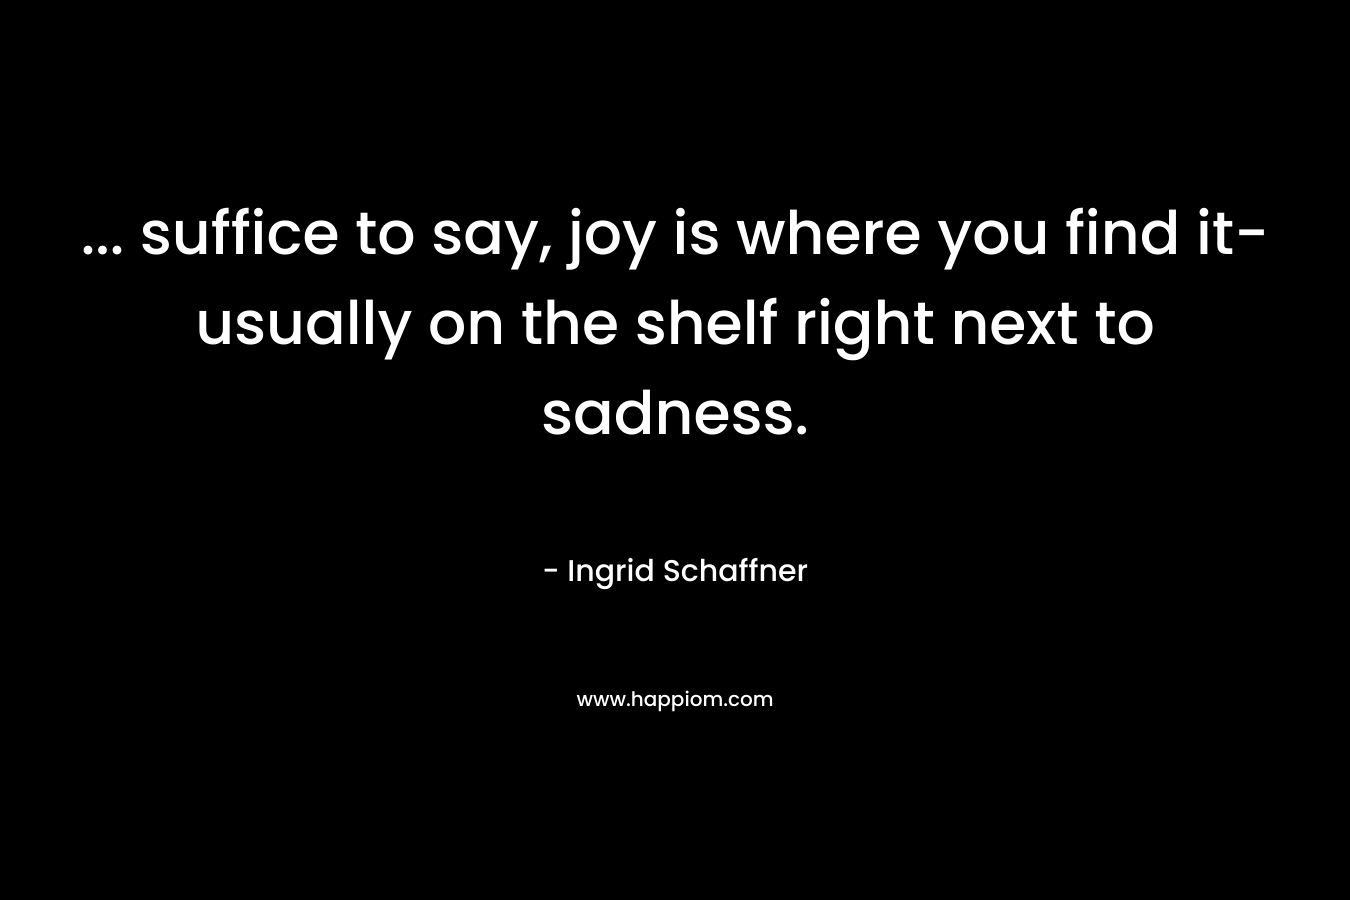 … suffice to say, joy is where you find it- usually on the shelf right next to sadness. – Ingrid Schaffner